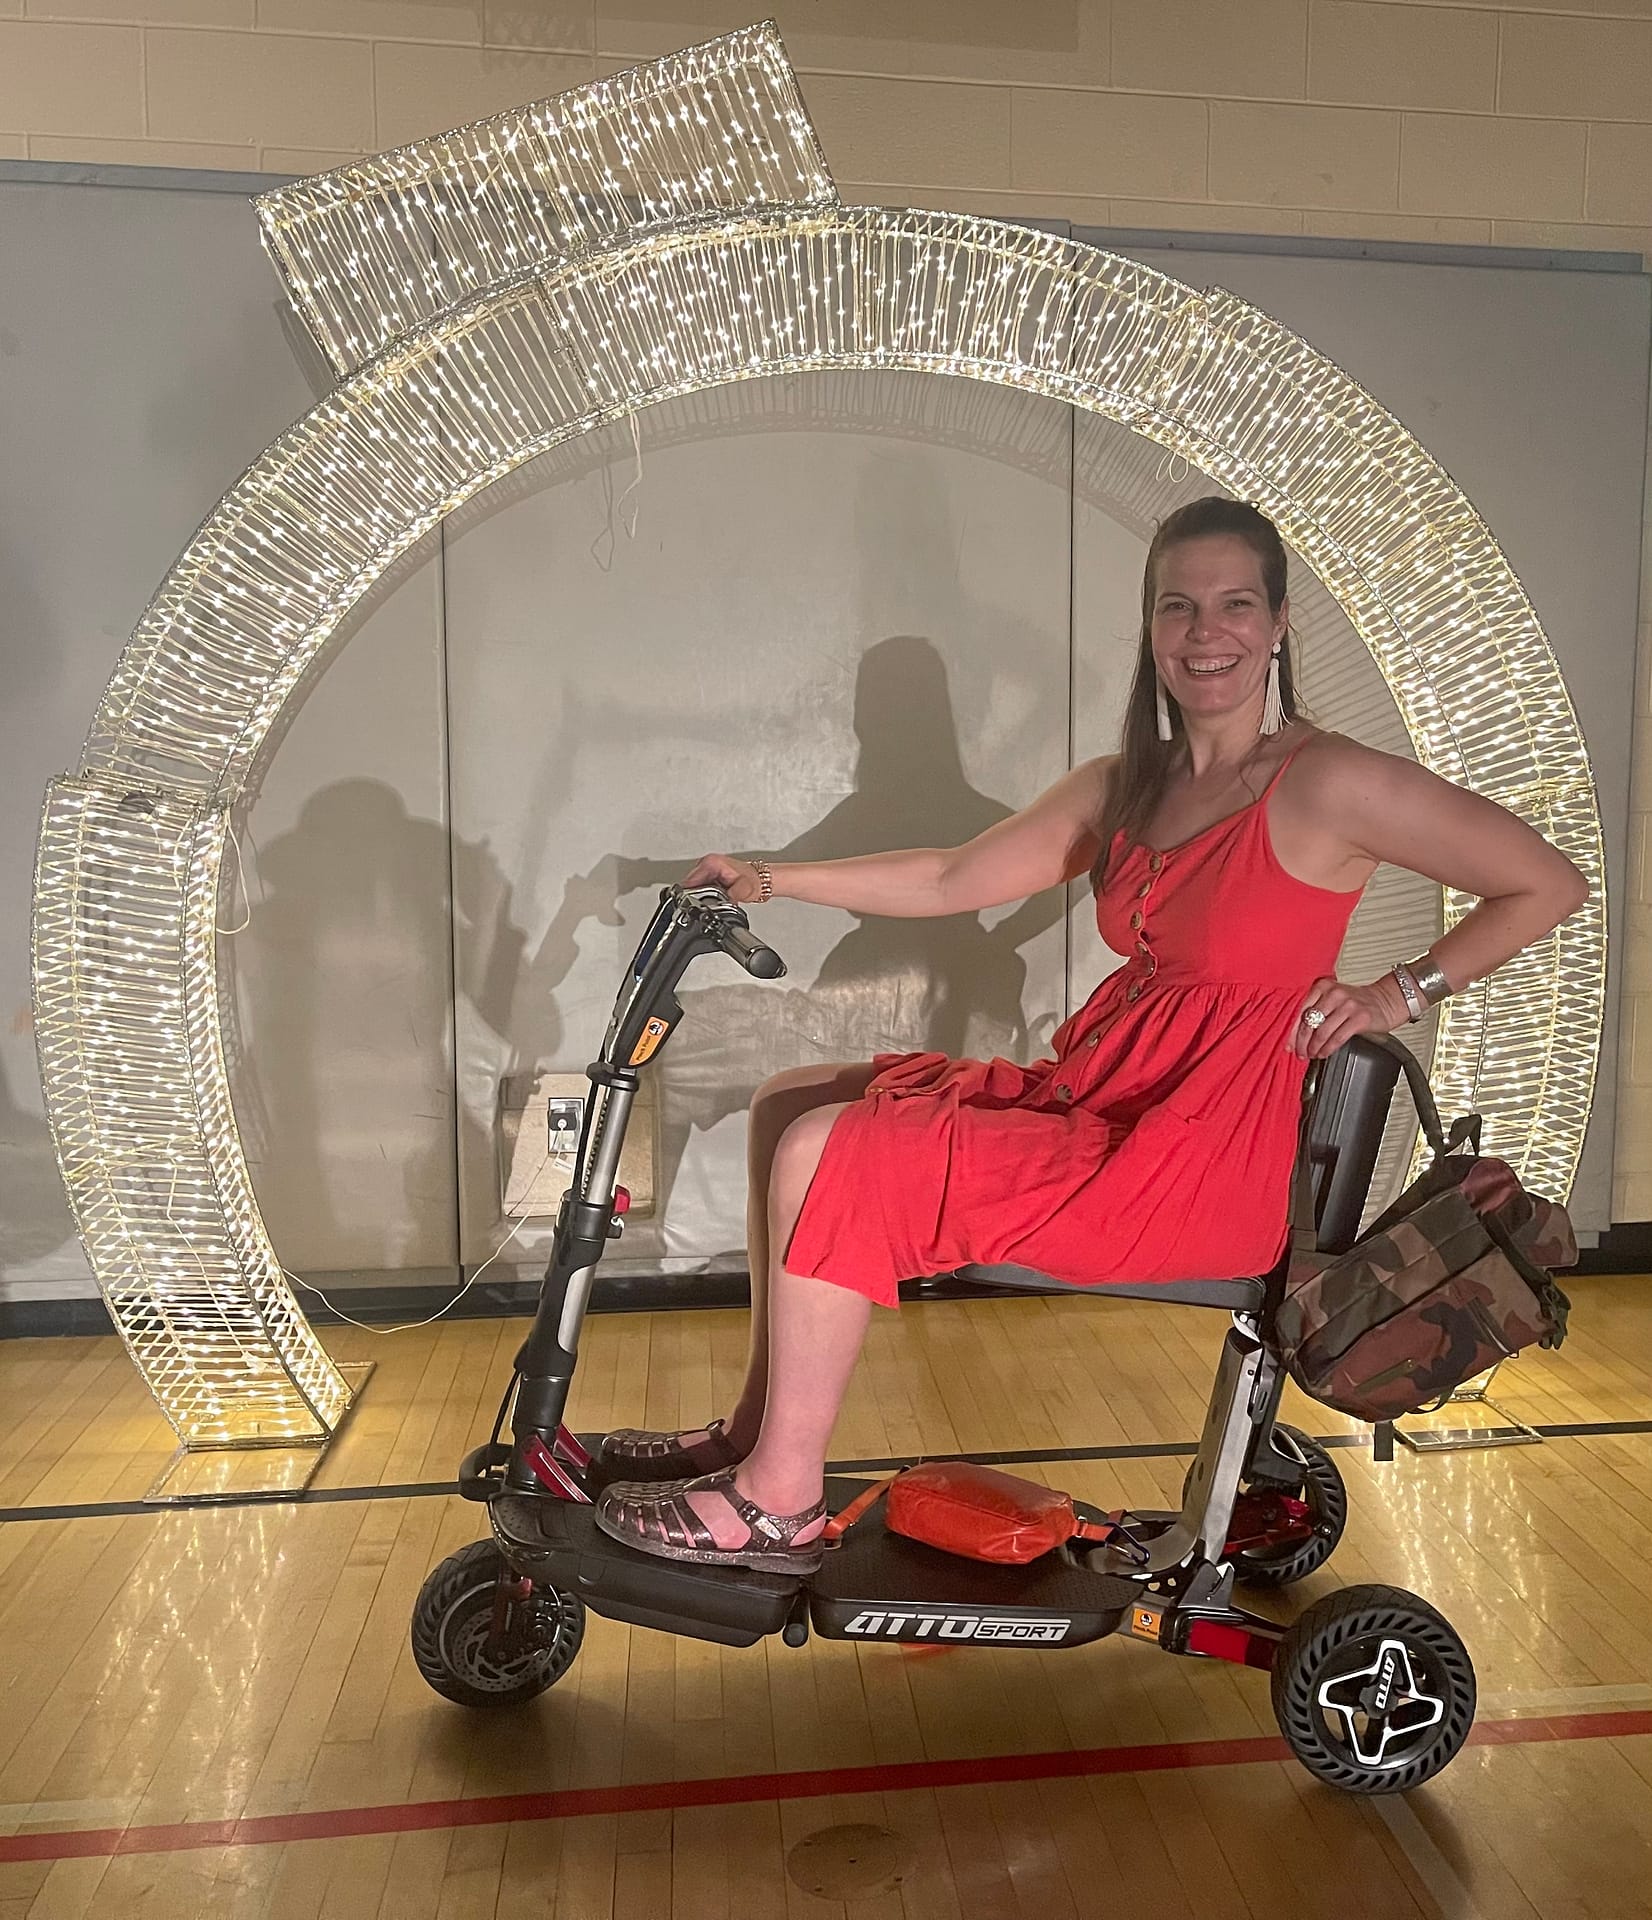 Me wearing a red dress and jelly shoes. I am a caucasian woman with long brown hair sitting on my Atto Mobility Scooter. I have stopped in front of a large sparkly semi circle. I have a big smile on my face.